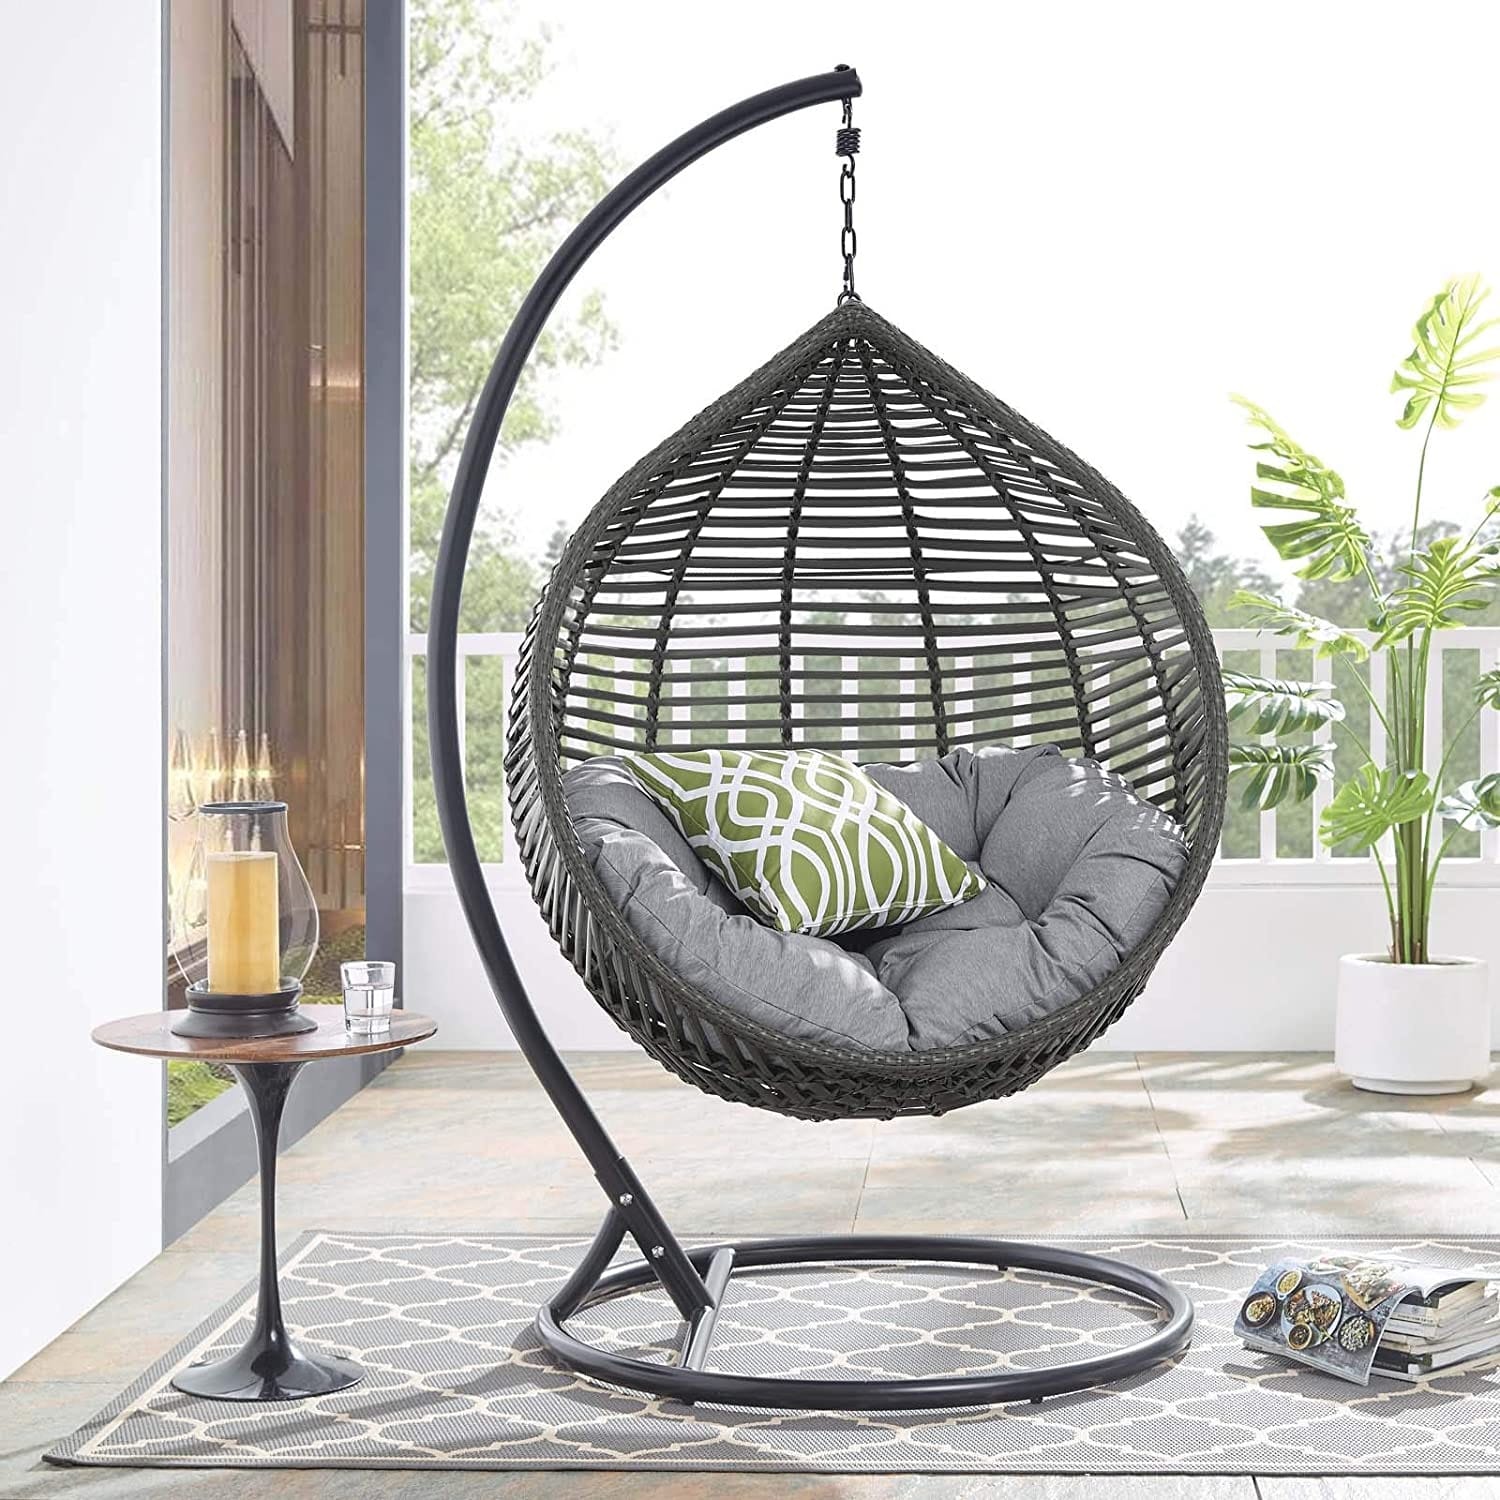 The 10 Best Hanging Papasan Chairs of 2021